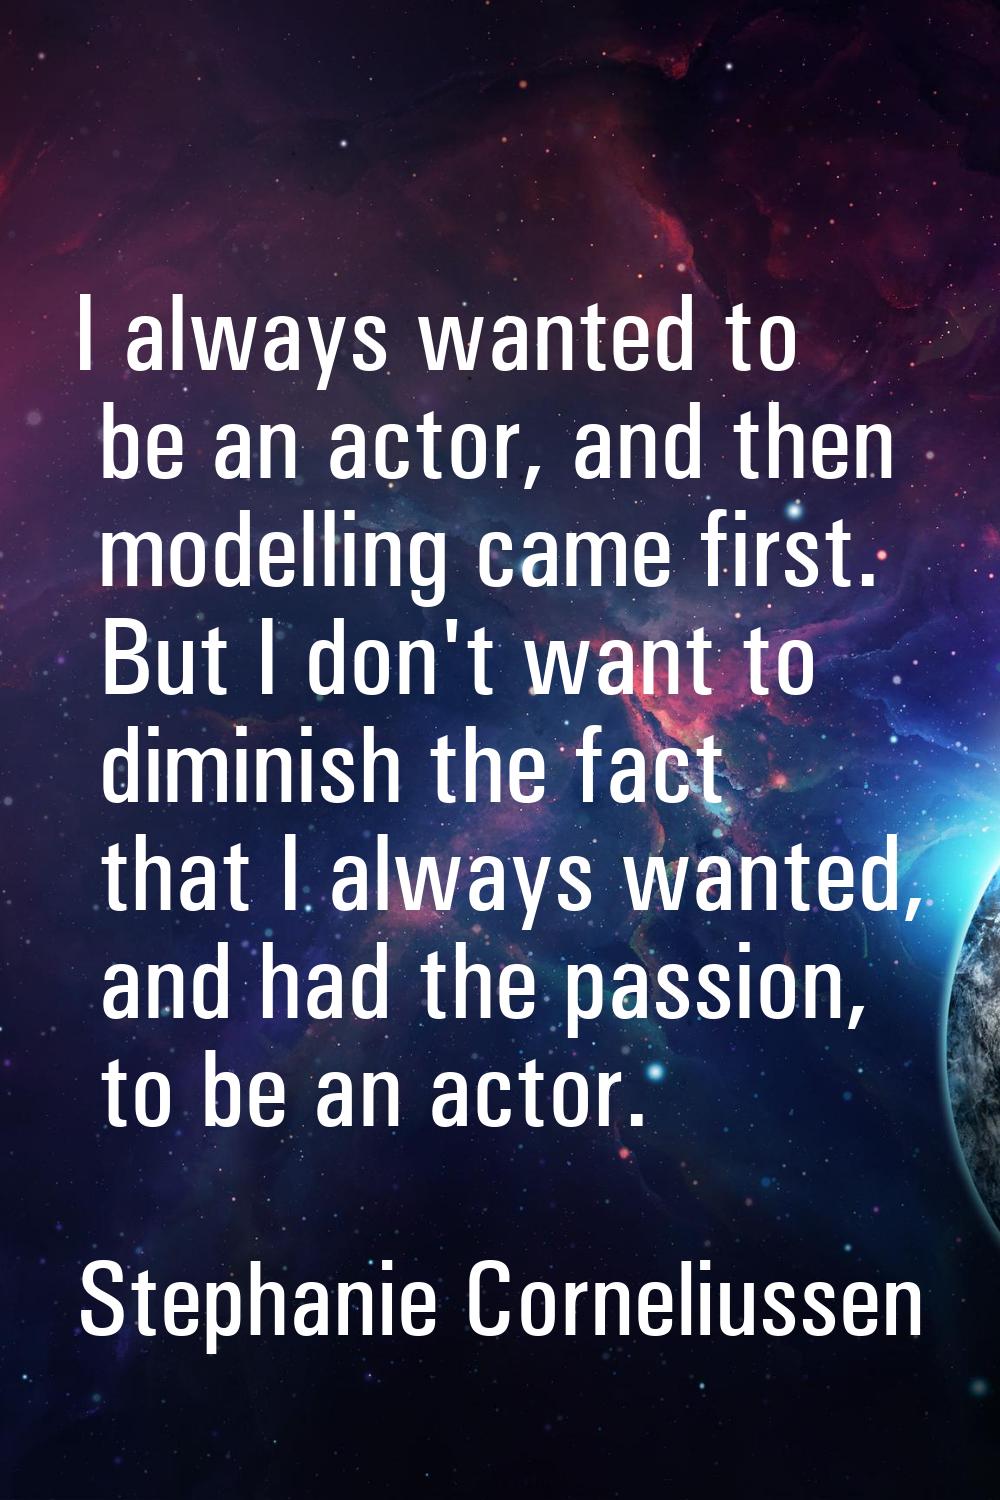 I always wanted to be an actor, and then modelling came first. But I don't want to diminish the fac